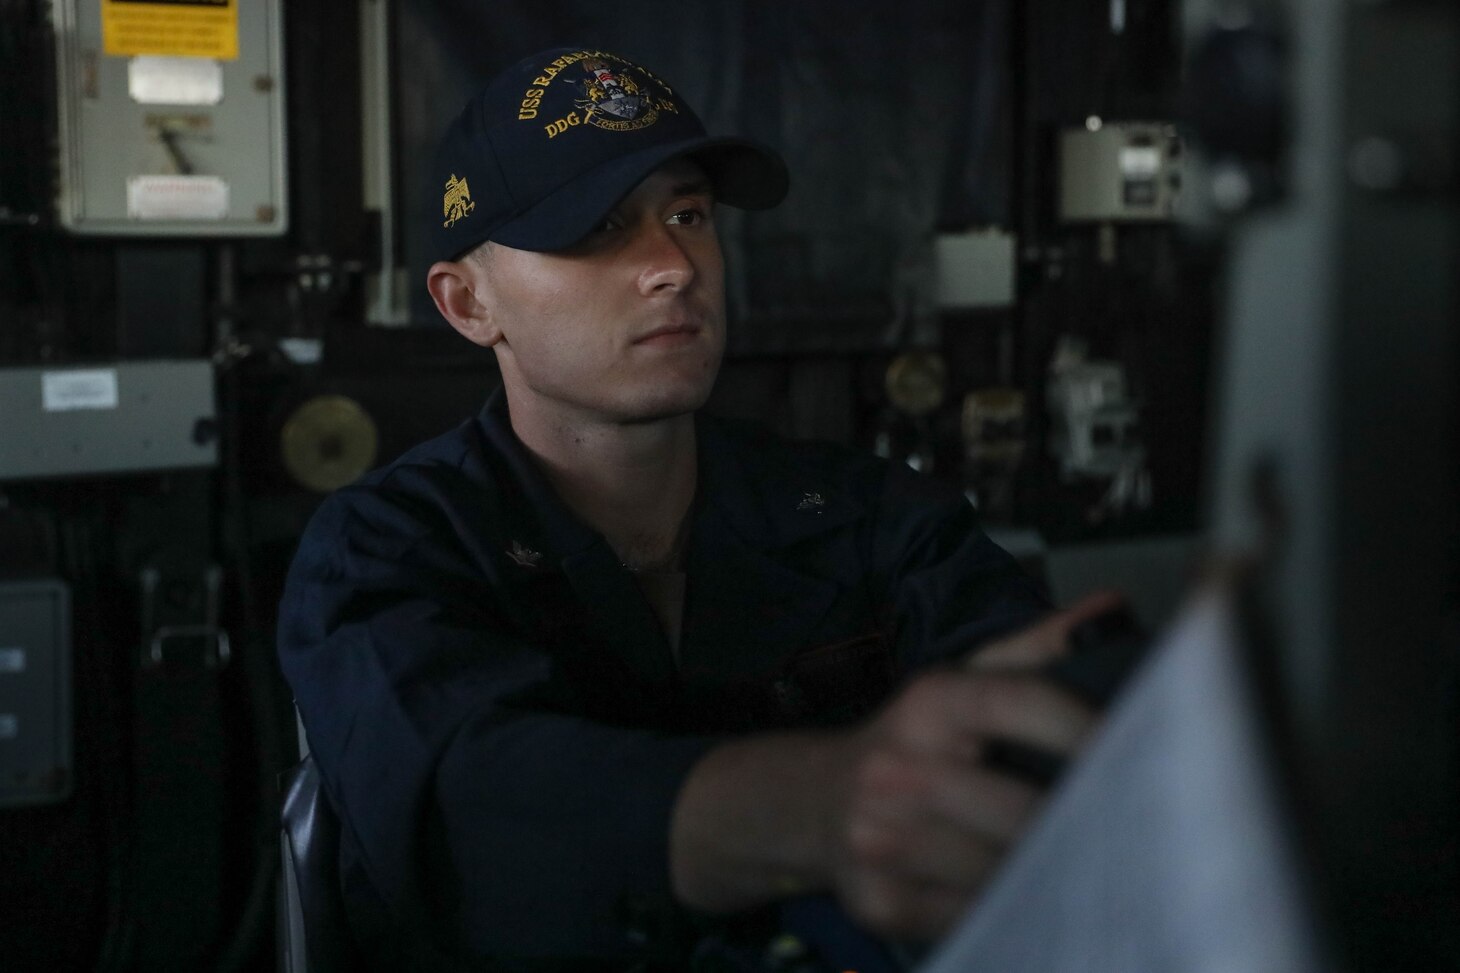 231102-N-CV021-1071 TAIWAN STRAIT (Nov. 2, 2023) Gunner’s Mate 3rd Class Stephen Forrest, from Knoxville, Tennessee, stands watch on the bridge aboard the Arleigh Burke-class guided-missile destroyer USS Rafael Peralta (DDG 115) in the Taiwan Strait, Nov. 2. Rafael Peralta is forward-deployed and assigned to Commander, Task Force 71/Destroyer Squadron (DESRON) 15, the Navy’s largest DESRON and the U.S. 7th Fleet’s principal surface force. (U.S. Navy photo by Mass Communication Specialist 3rd Class Alexandria Esteban)